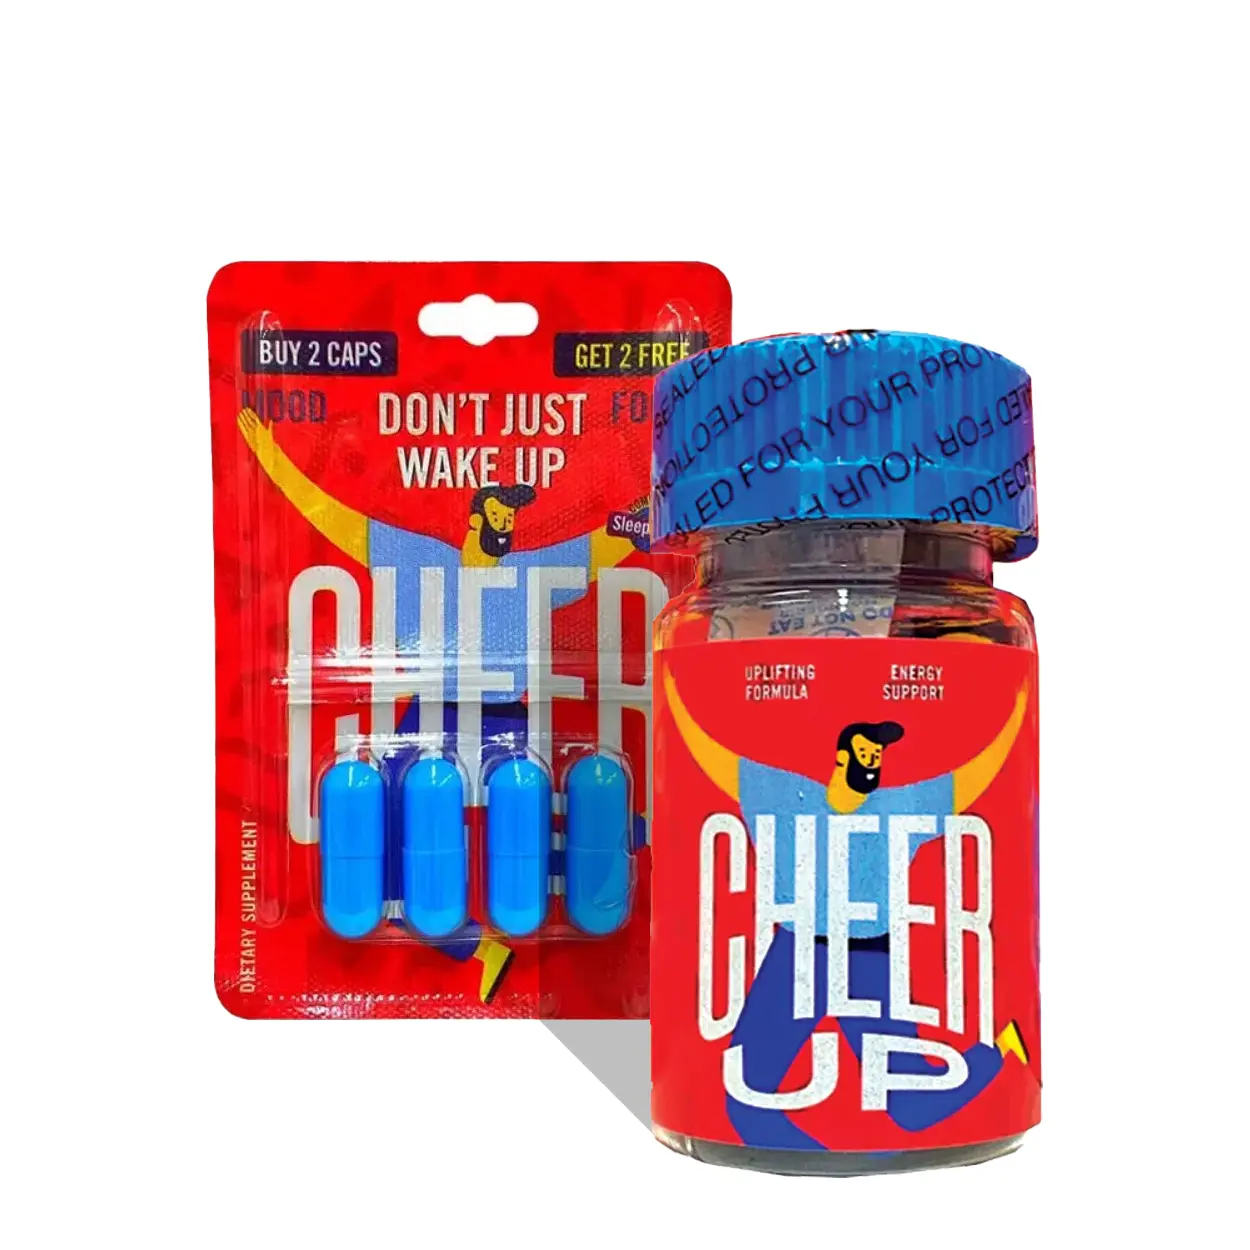 Cheer Up Uplifting Energy Support Capsules